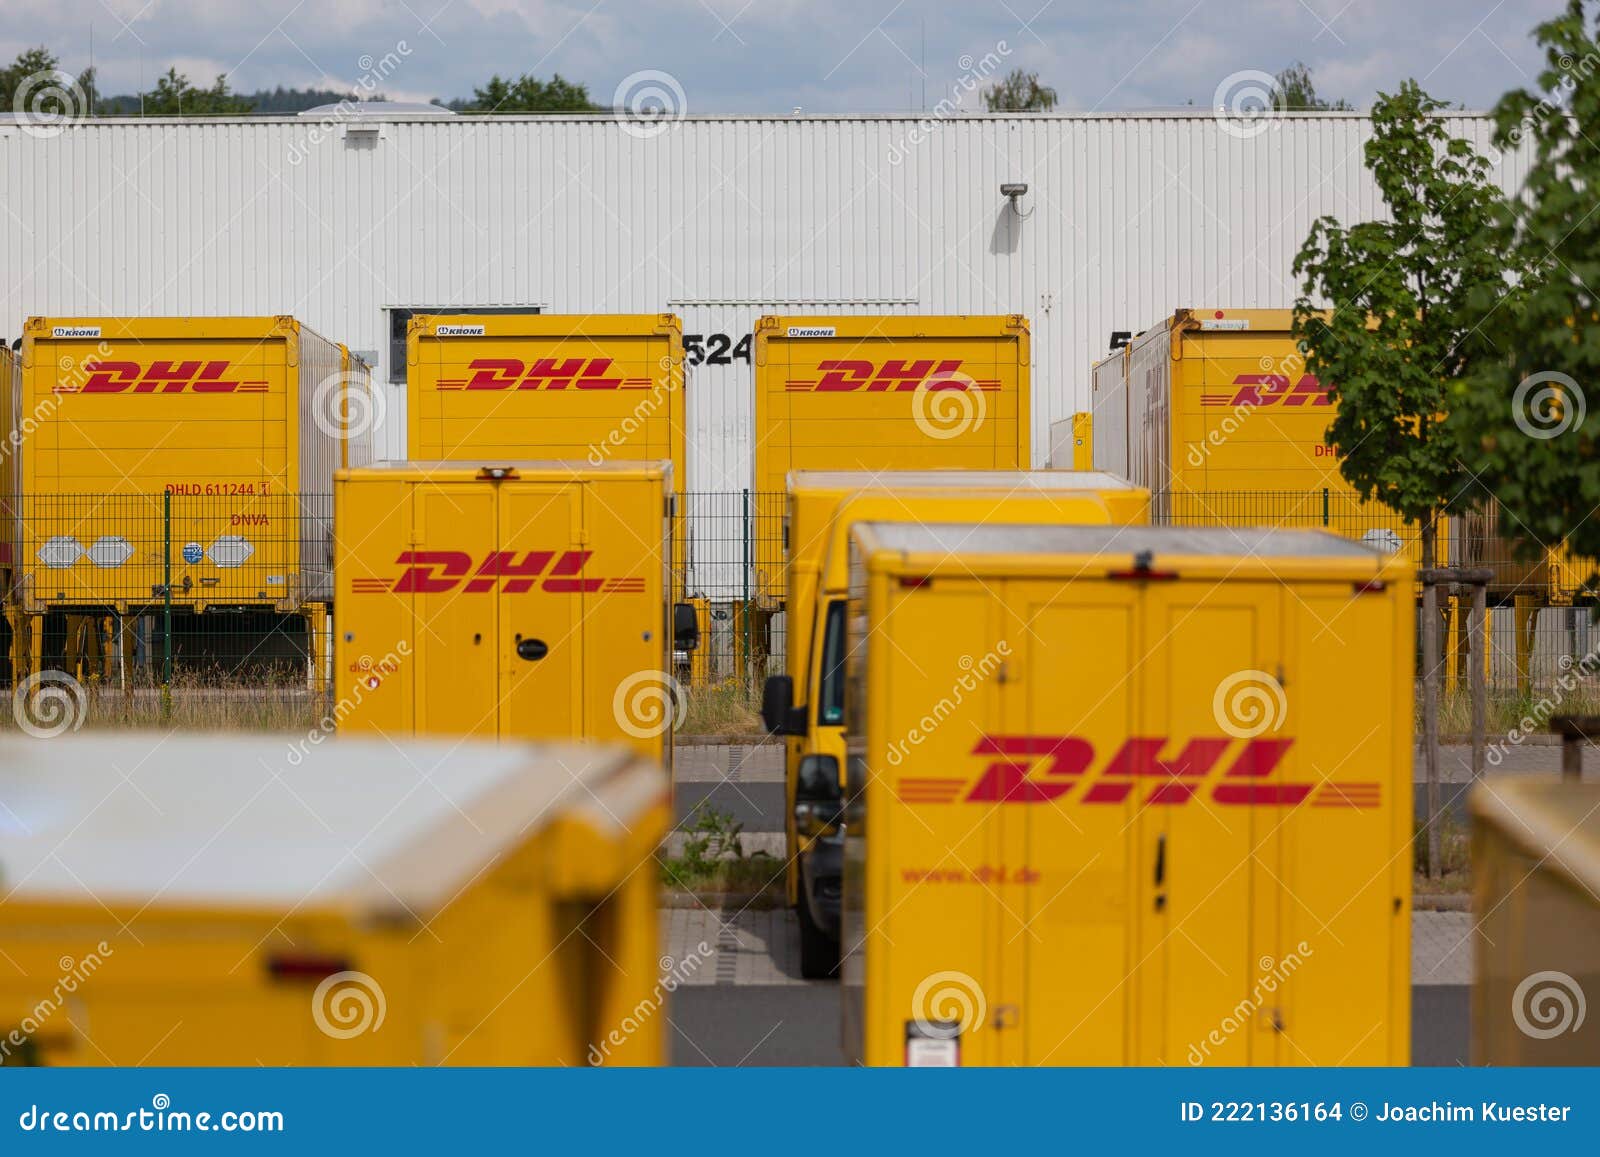 DHL Delivery Vans and Containers in Front of a DHL Depot Editorial ...